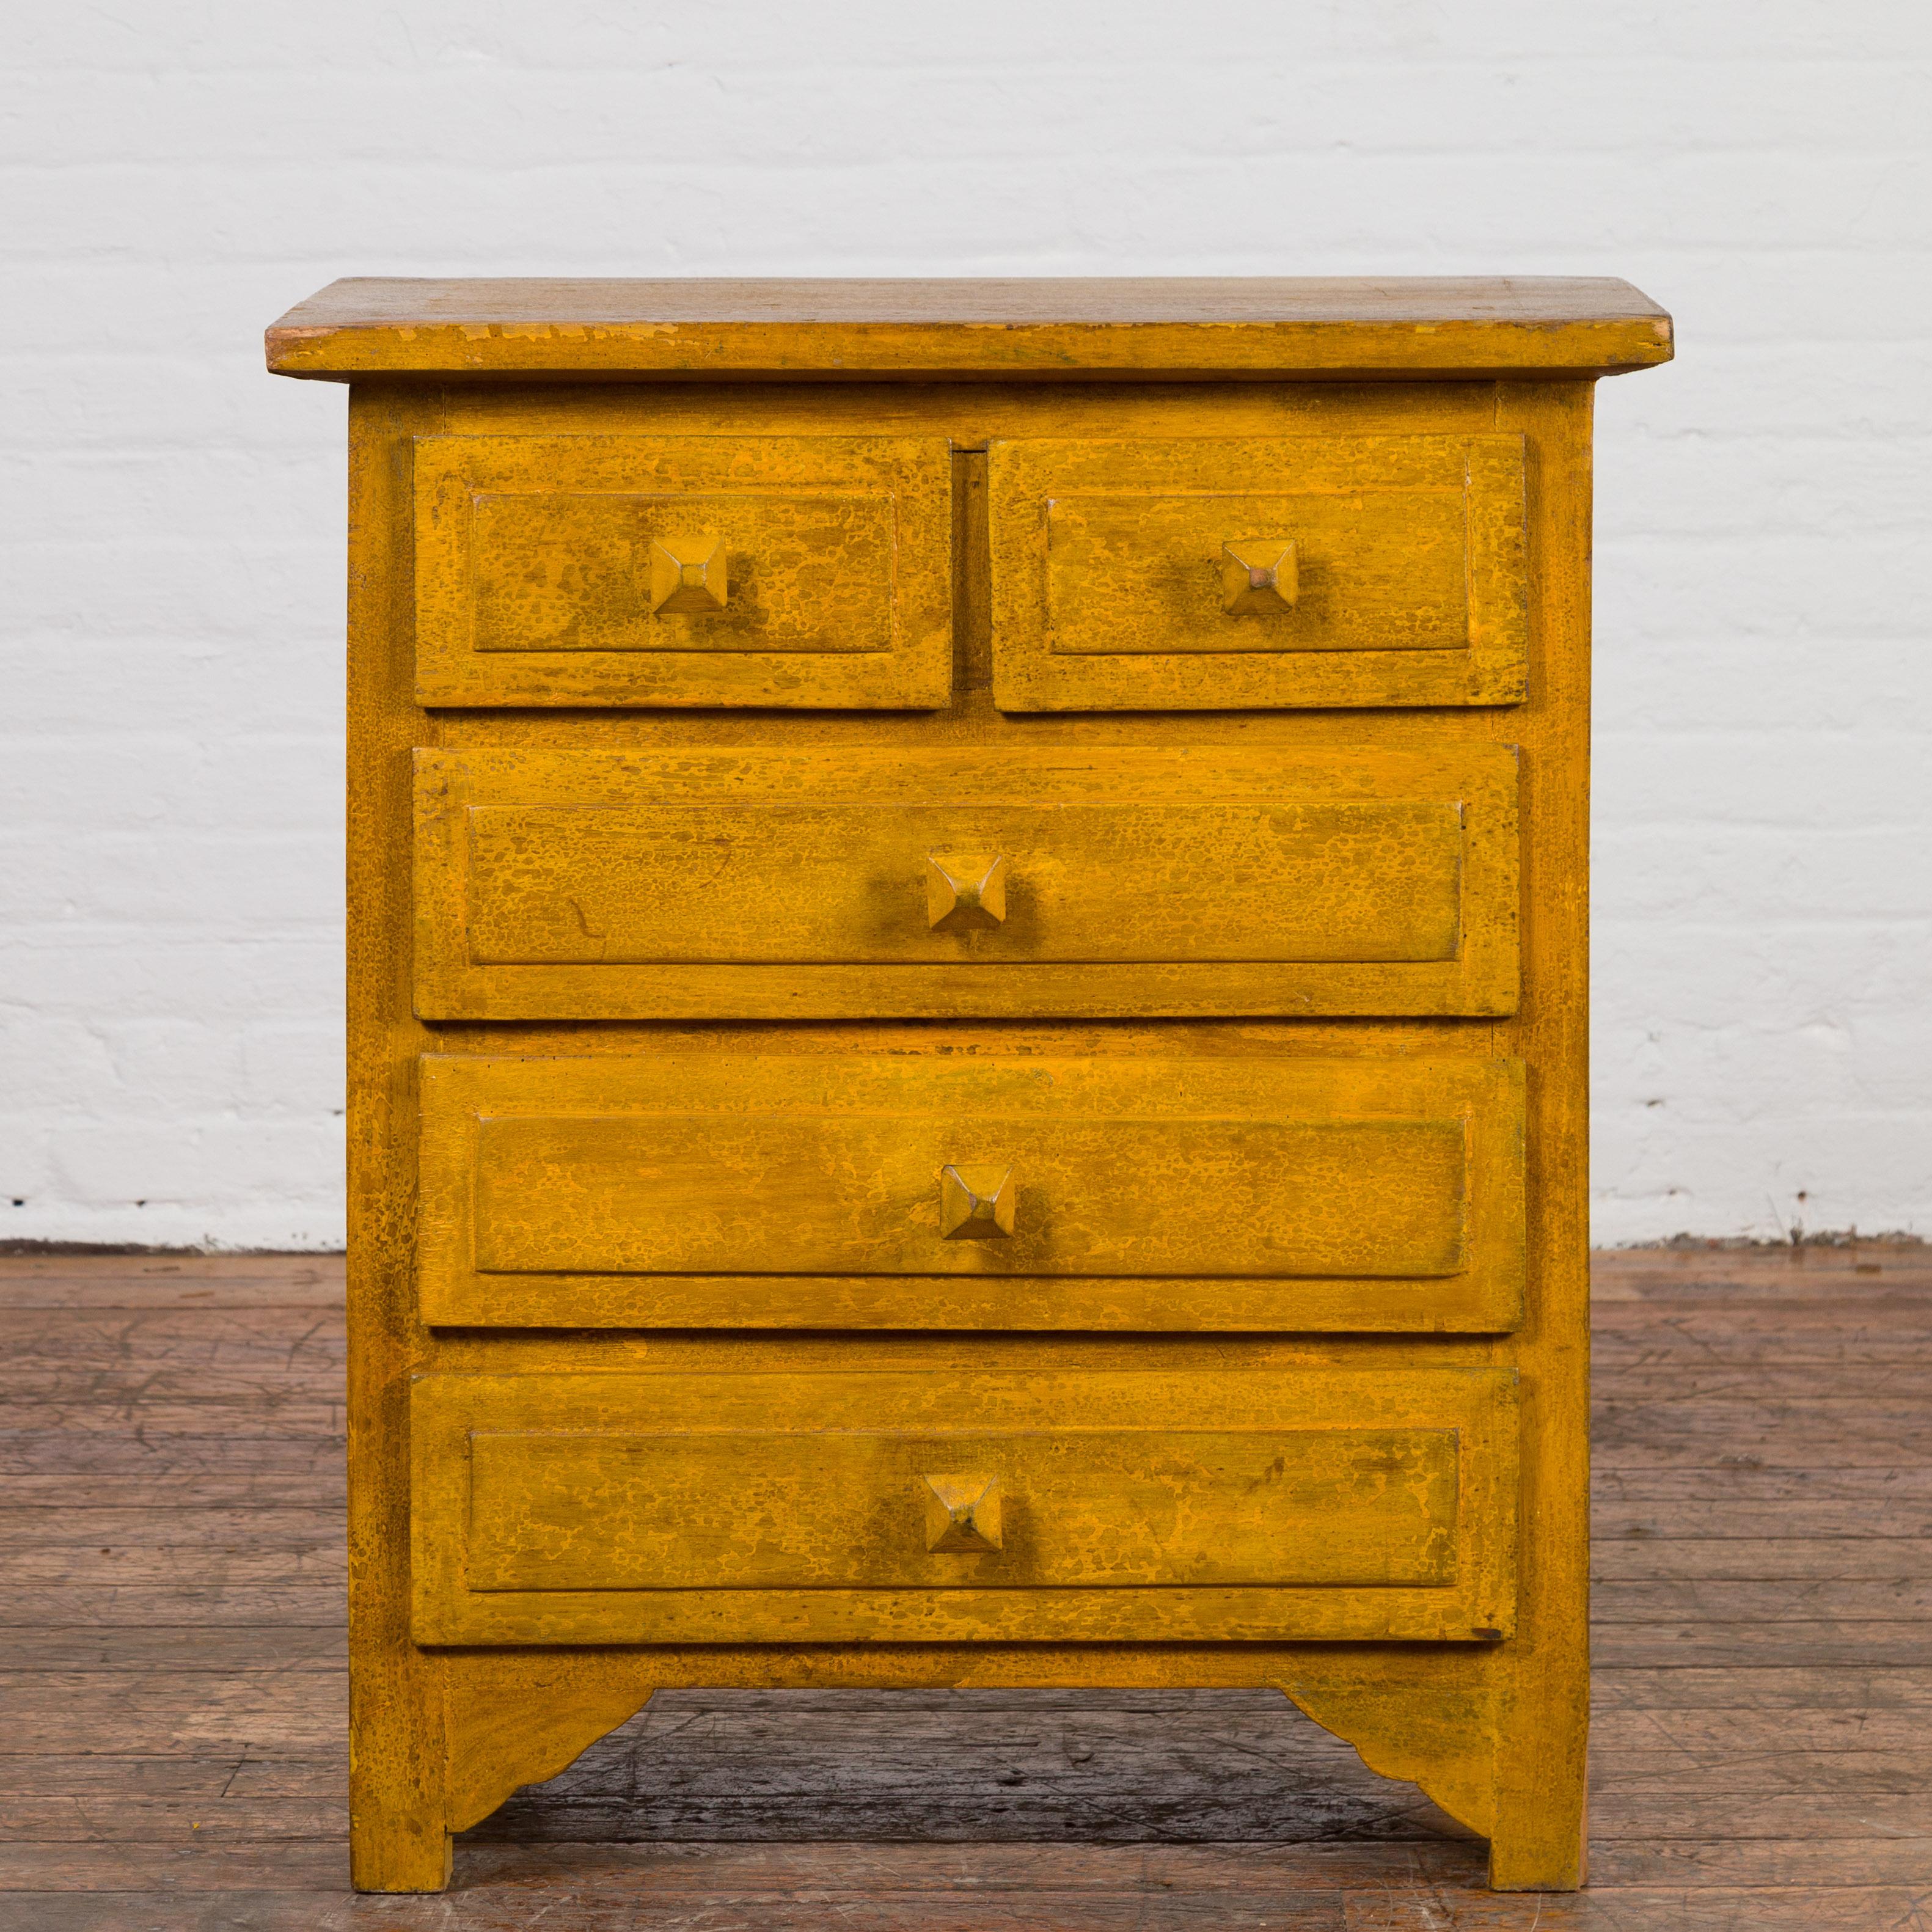 A vintage Thai side chest from the mid 20th century, with mustard glaze, five drawers and distressed patina. Created in Thailand during the midcentury period, this vintage side chest features a rectangular top sitting above five drawers (two small